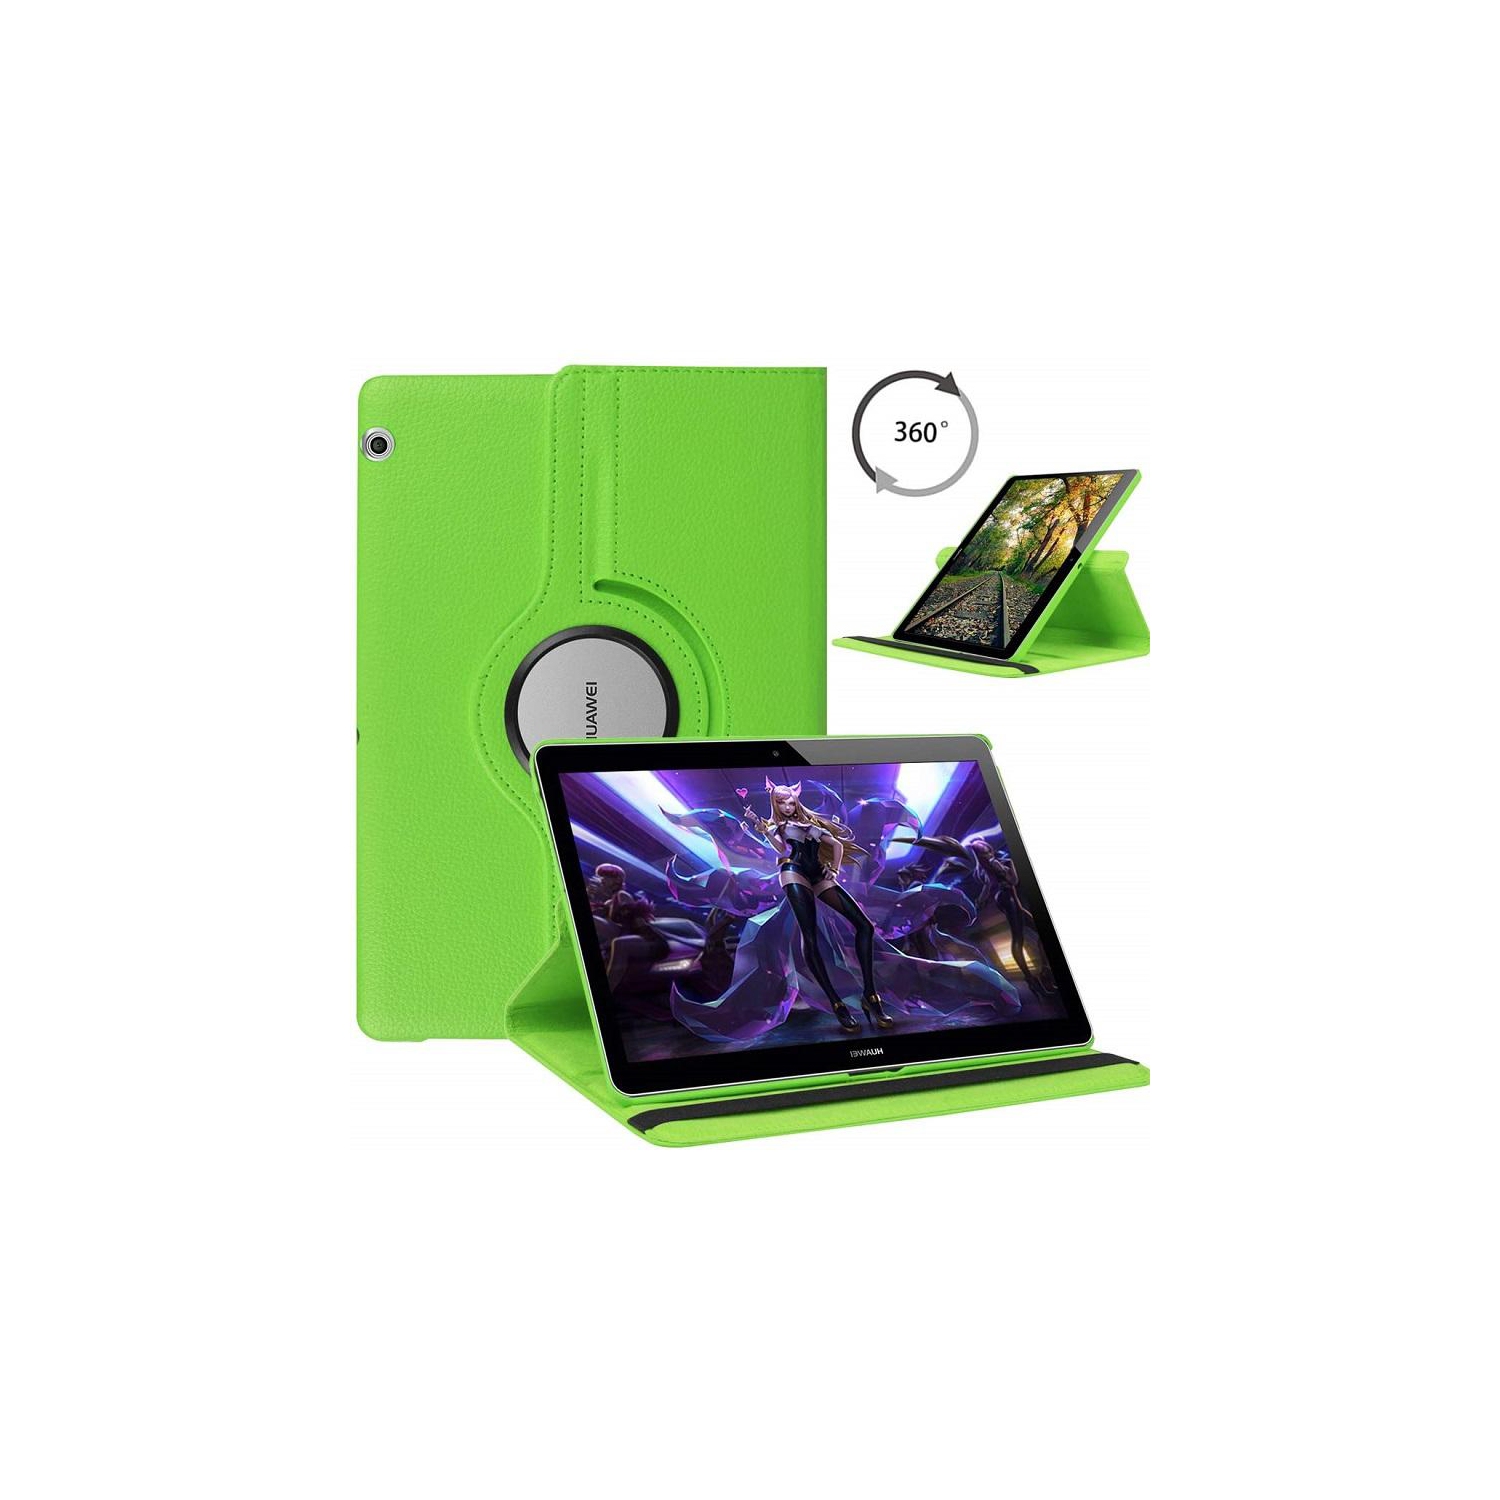 [CC] 360 Degree Rotating Tablet Case Cover For Huawei MediaPad T5, Green